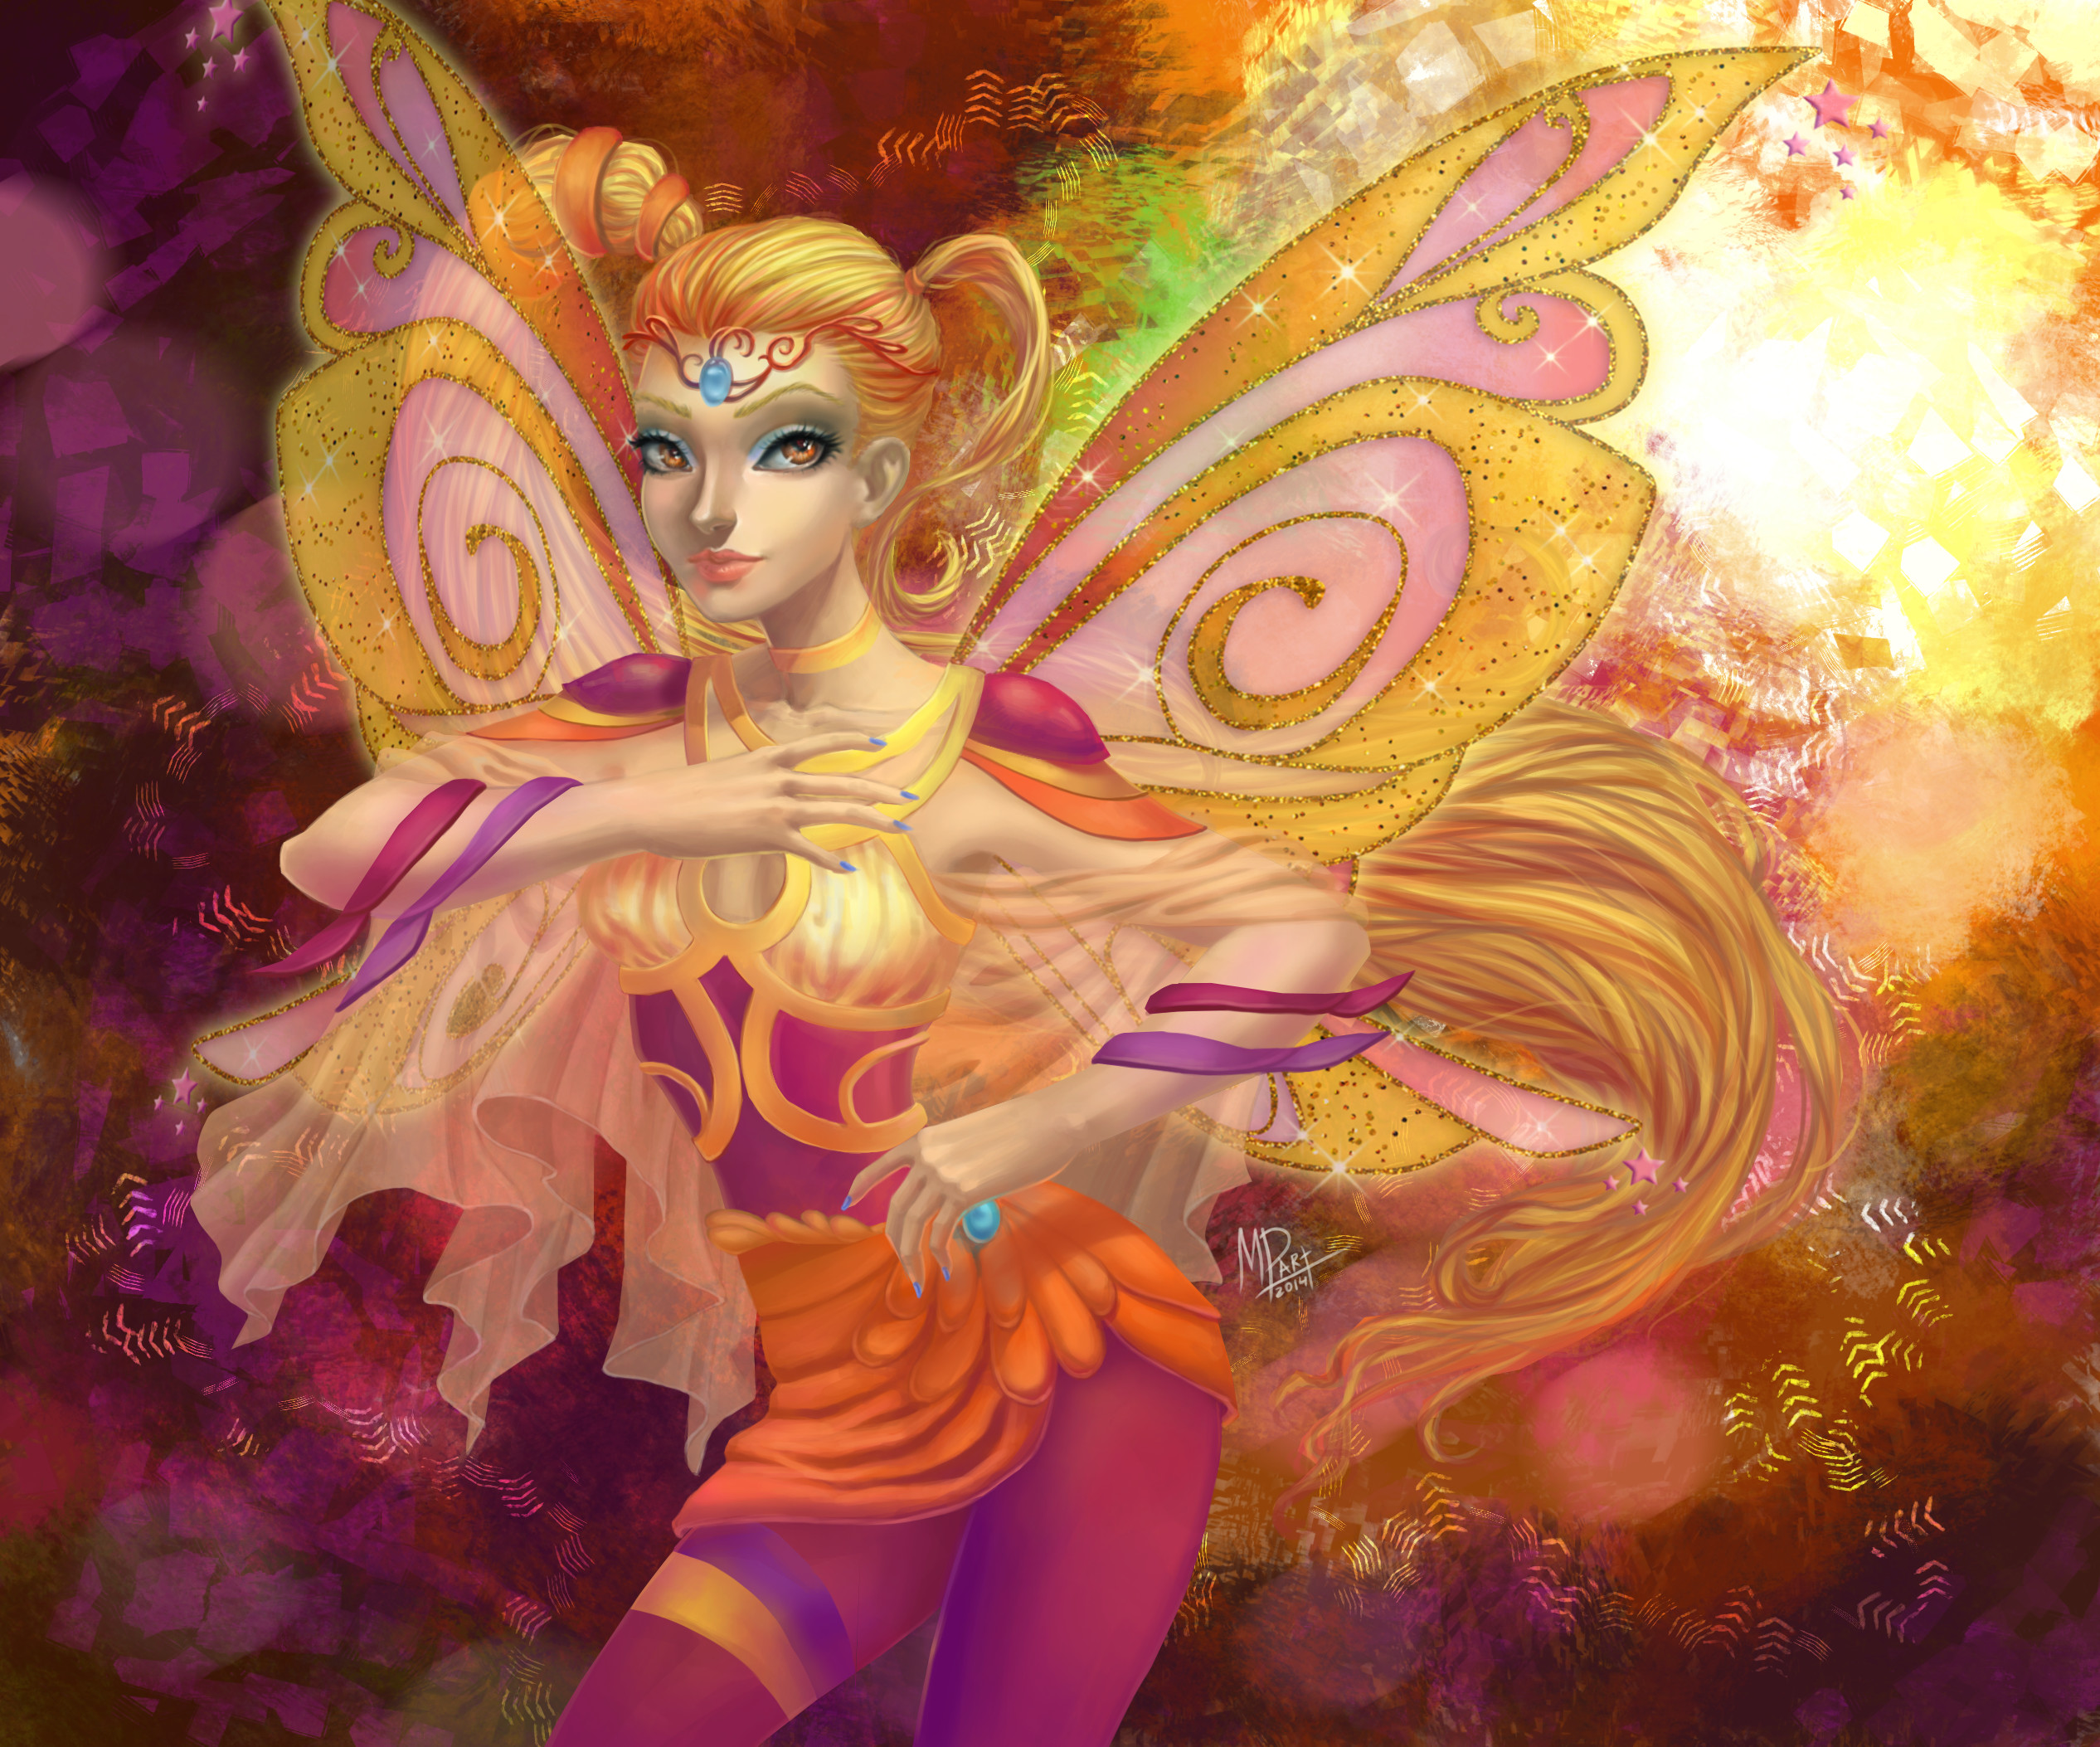 2532x2106 ... Stella from the Winx Club by MPA-rt